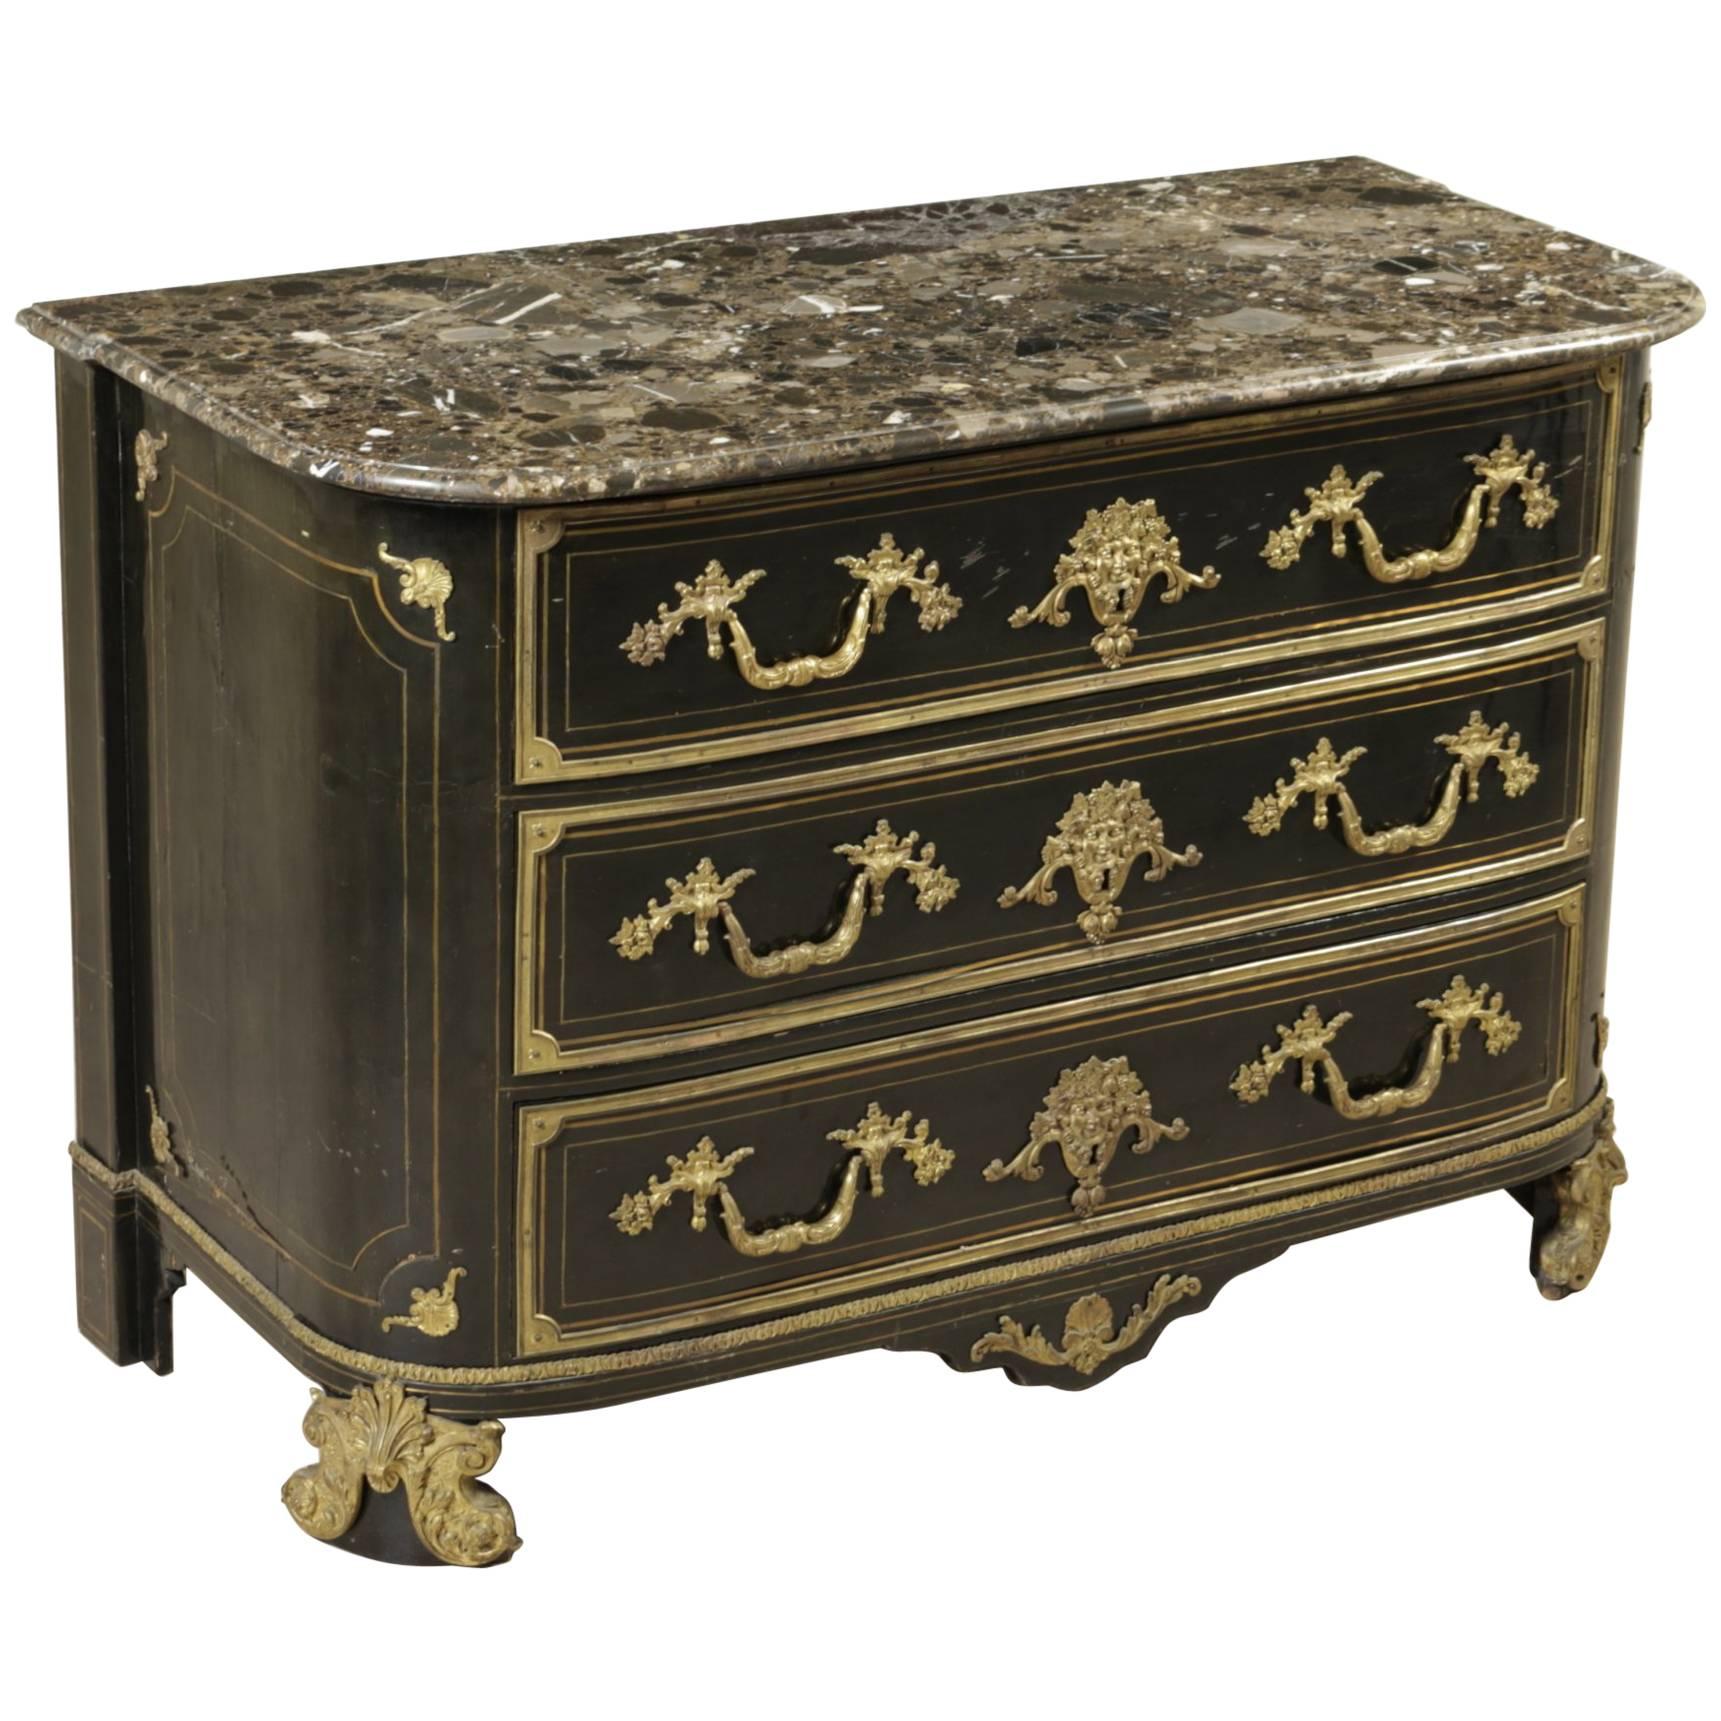 Antique Chest of Drawers Louis XIV Manufactured in France, 18th Century